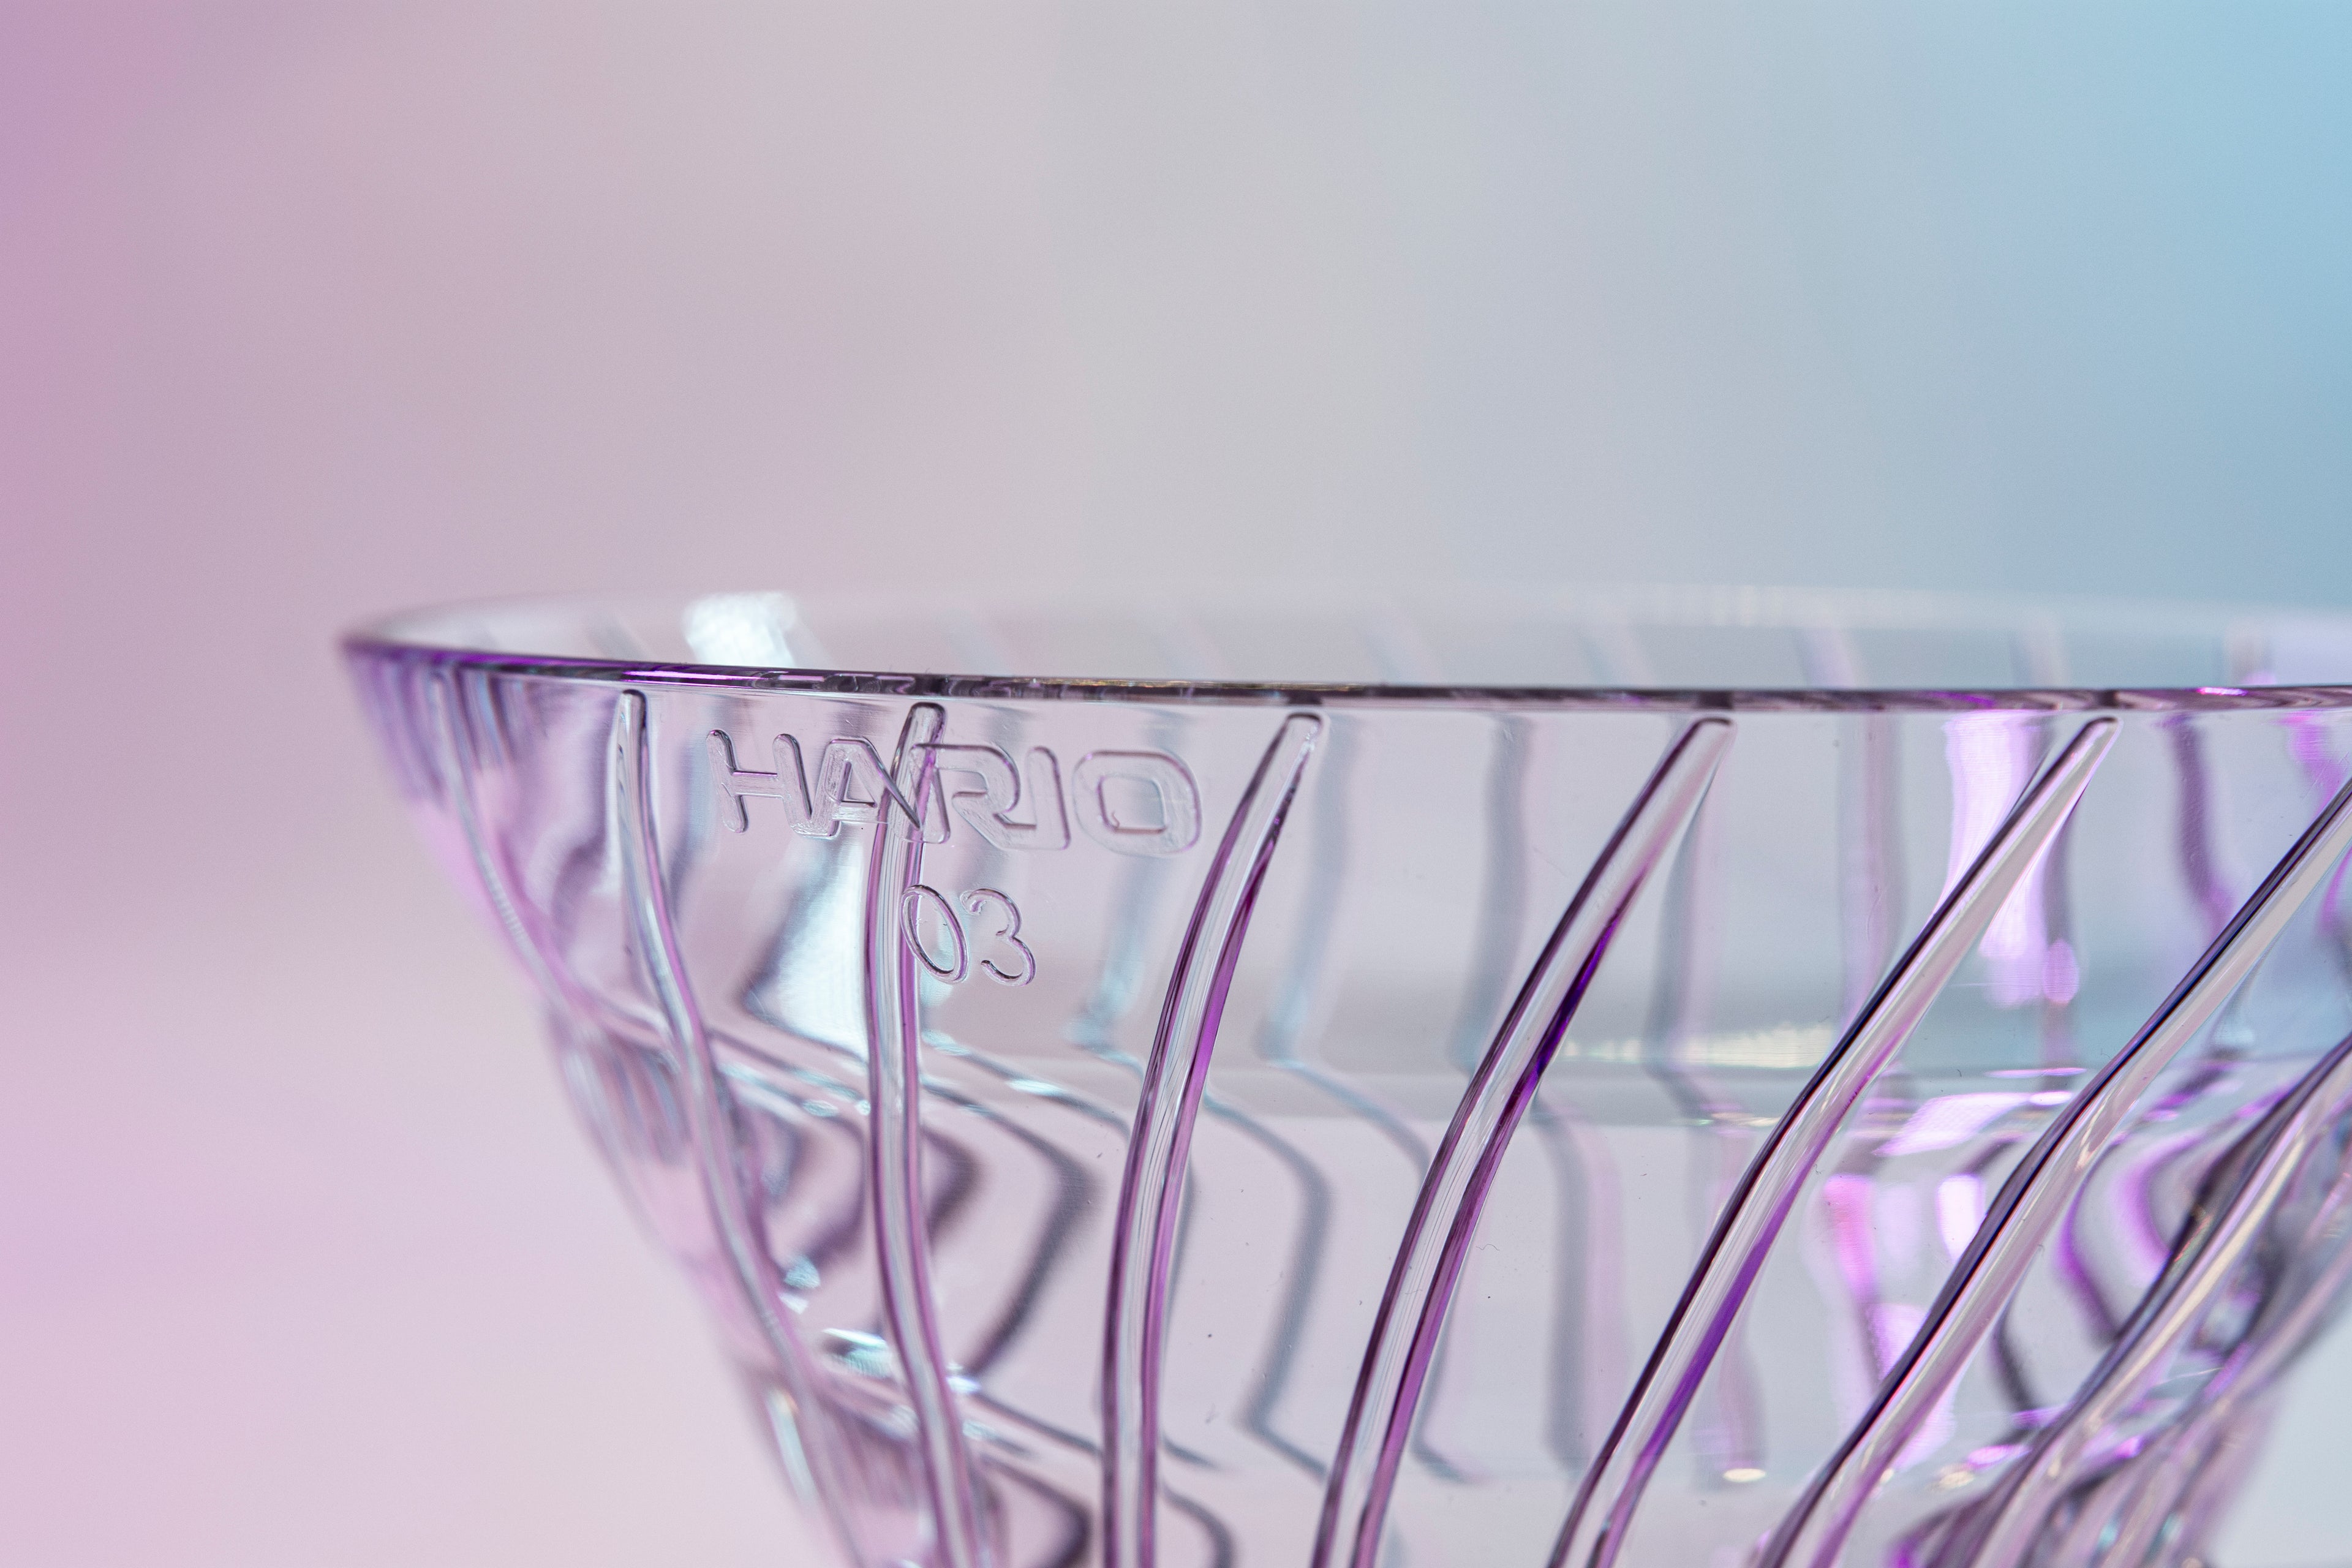 Close up of Hario logo and &quot;03&quot; size number on a clear plastic cone shaped dripper with round base and handle on a pink gradient background.